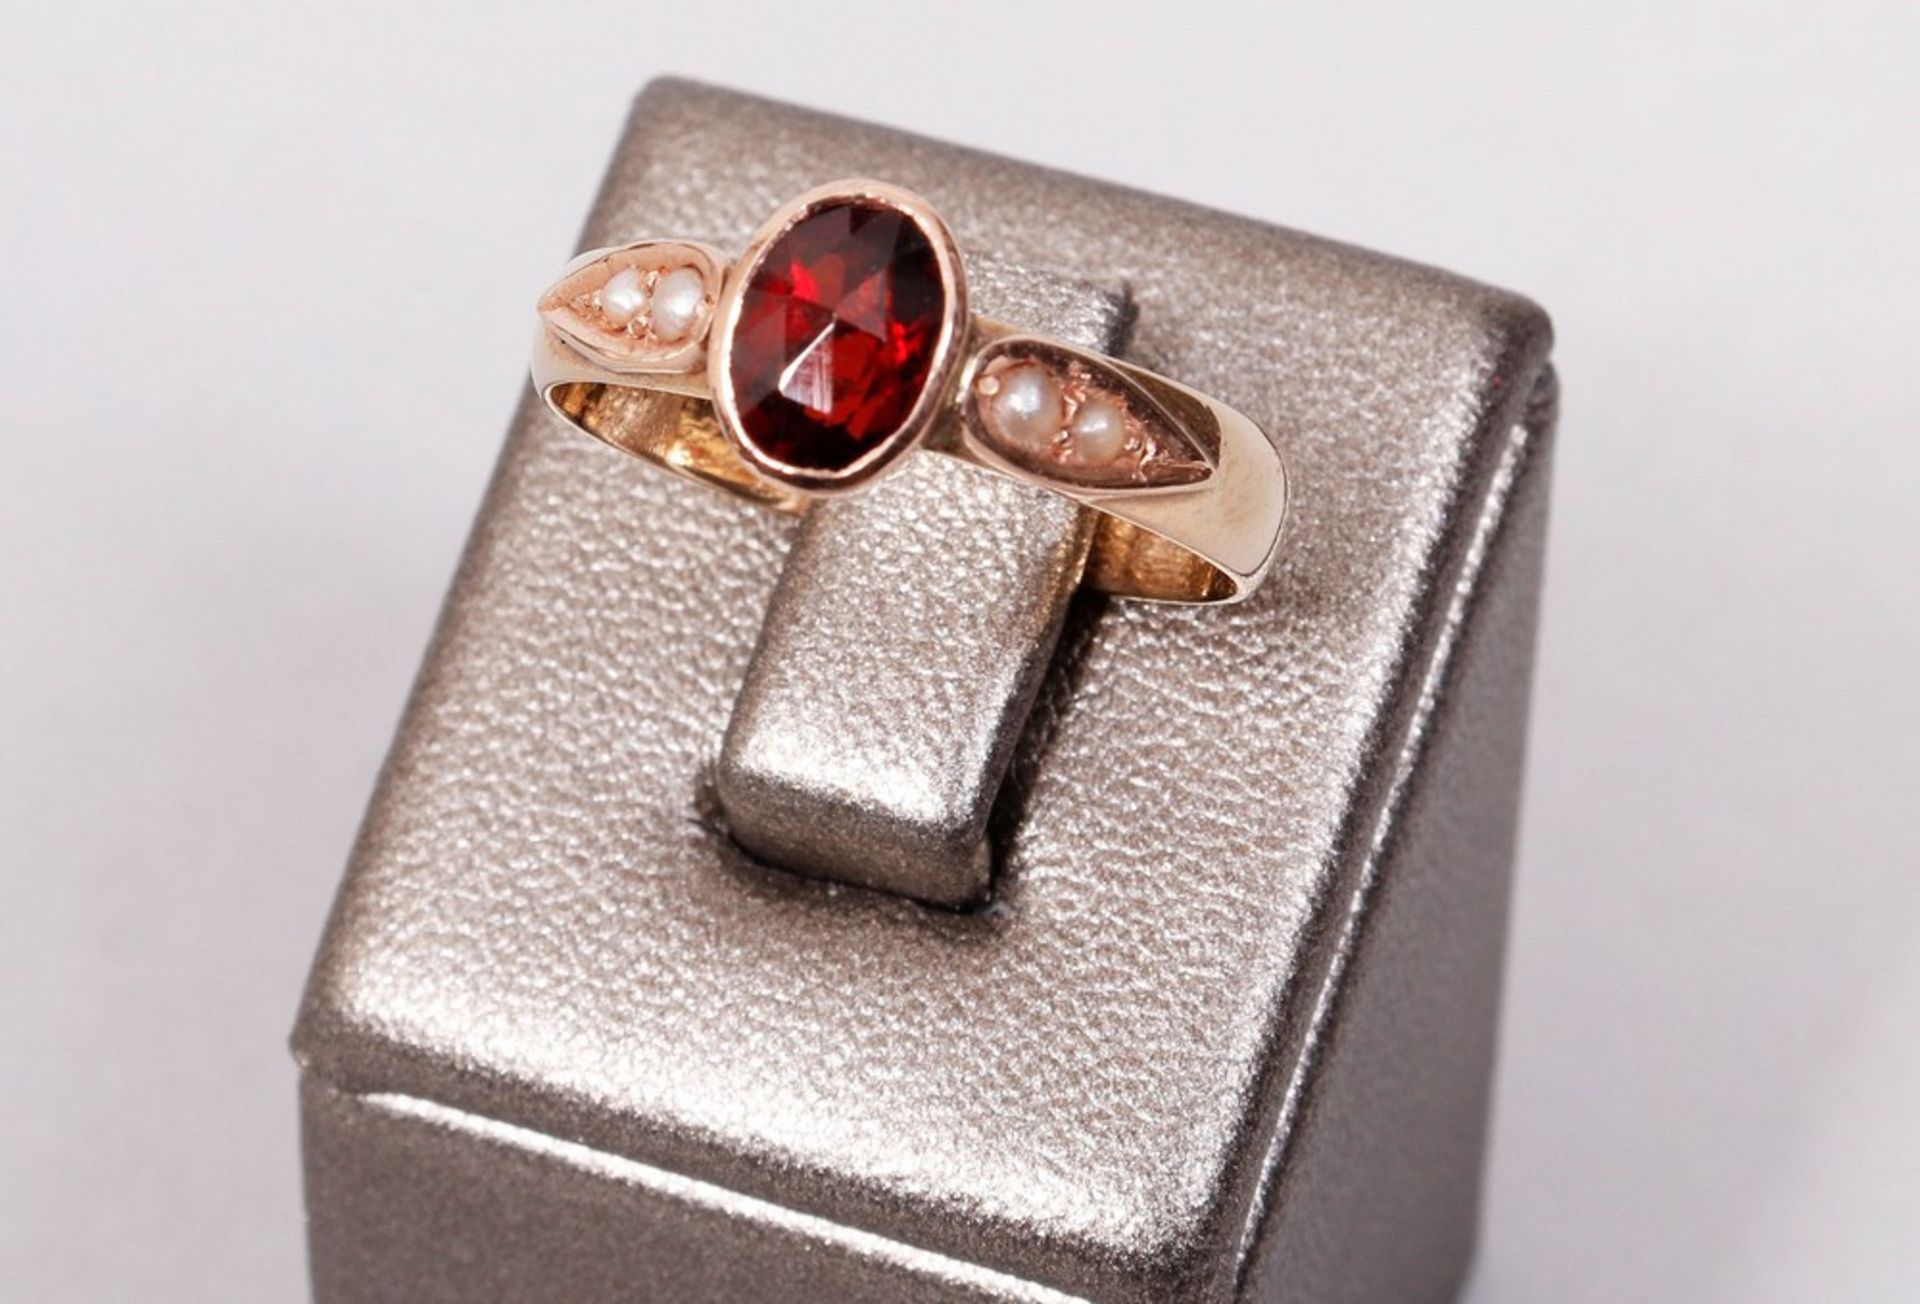 Ring, 585 red gold, set with an oval garnet stone - Image 2 of 3